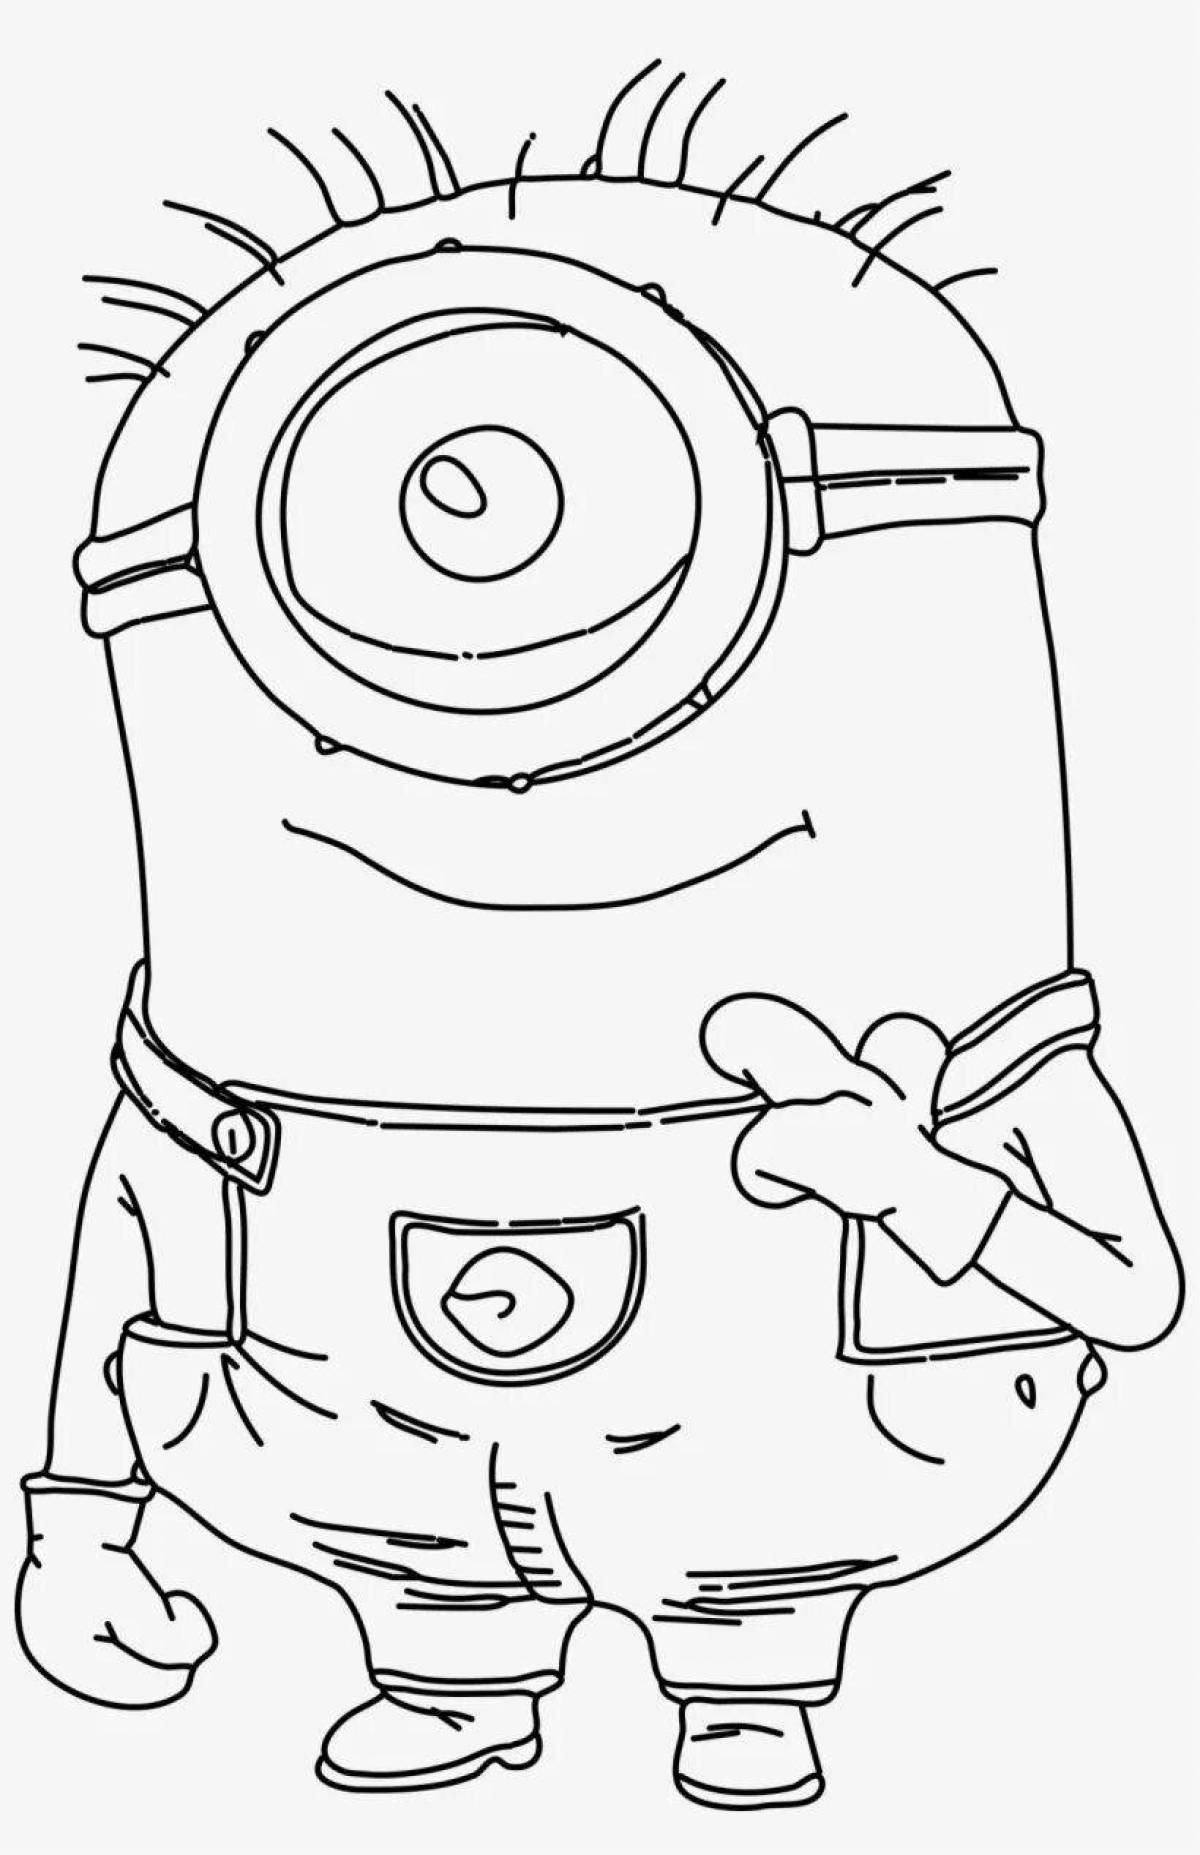 Despicable Me Minions Animated Coloring Page